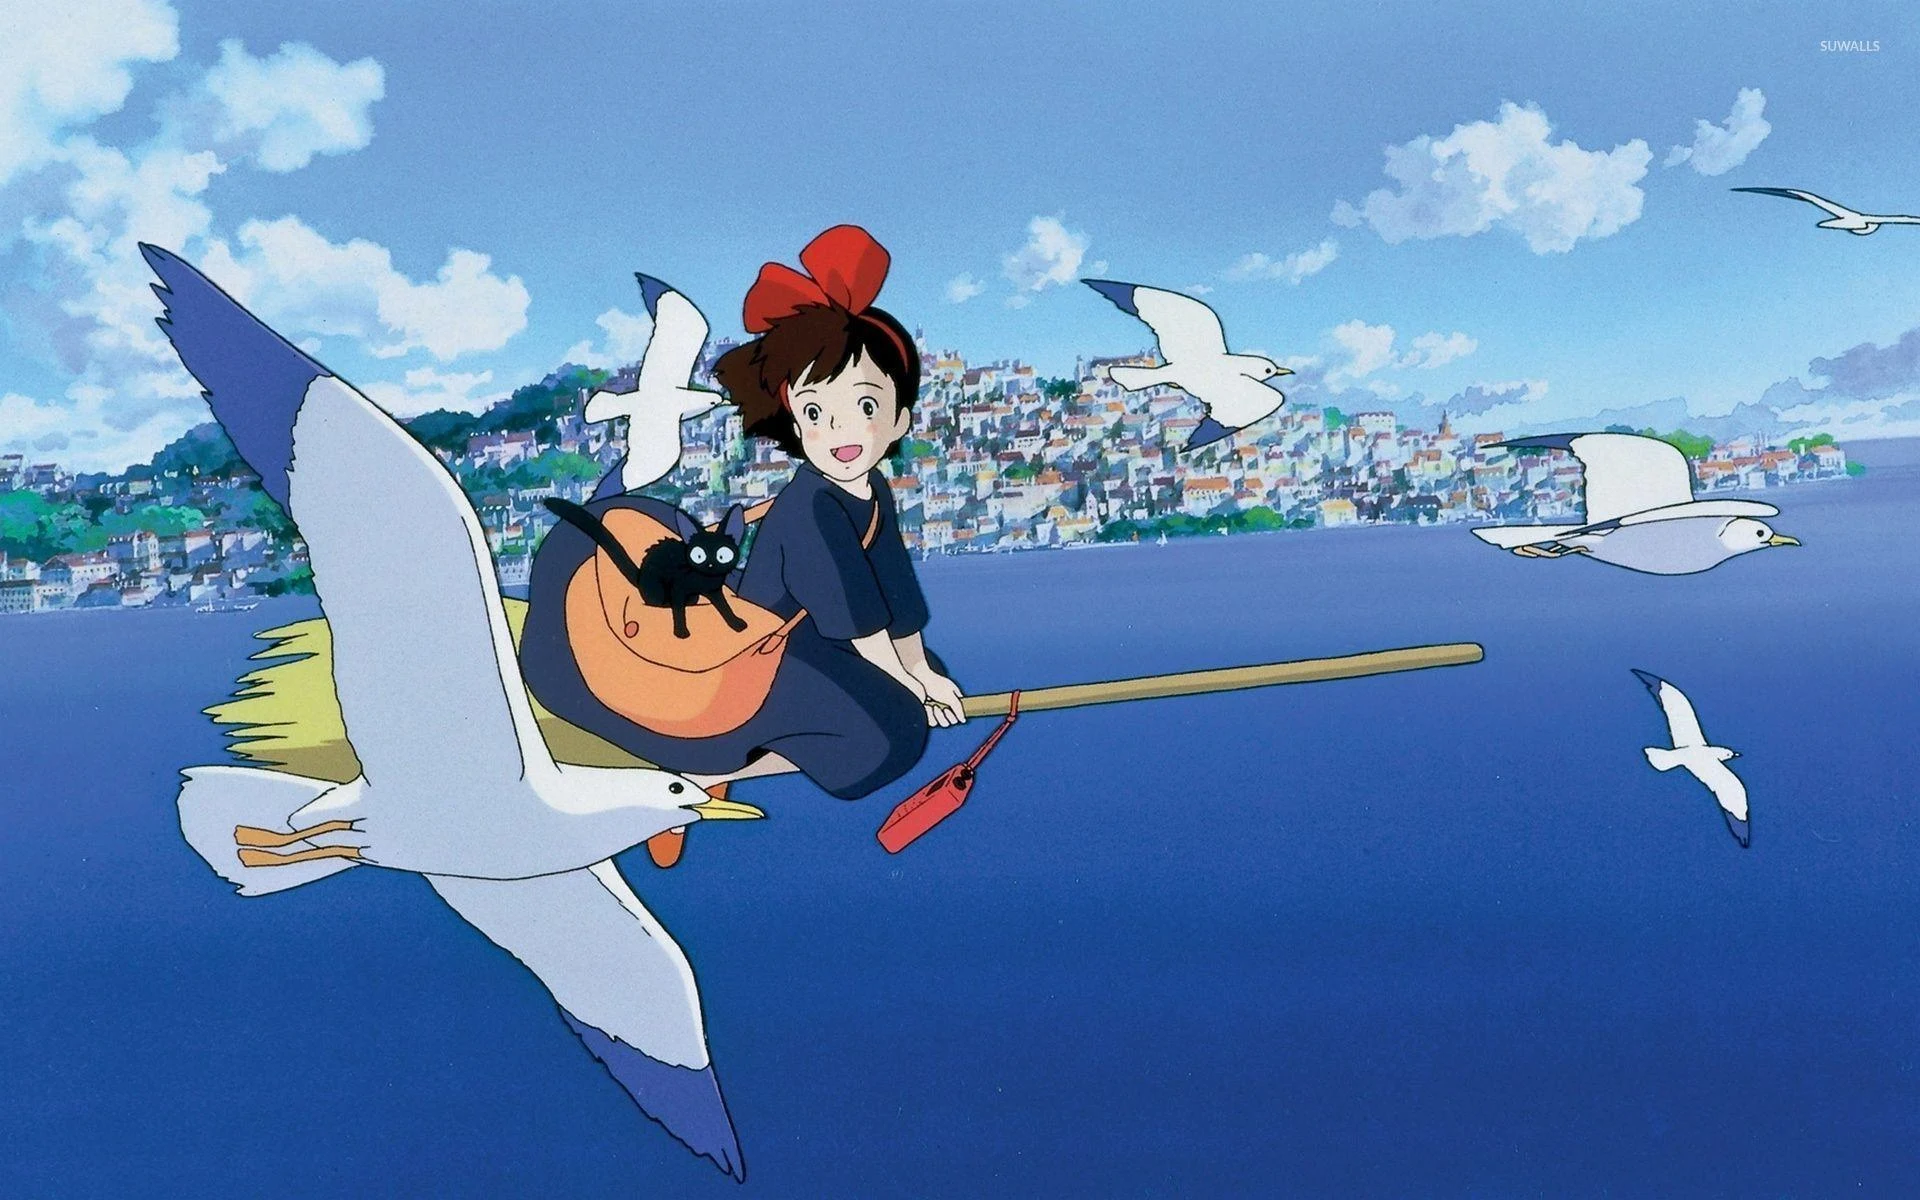 Awesome Kiki's Delivery Service Image